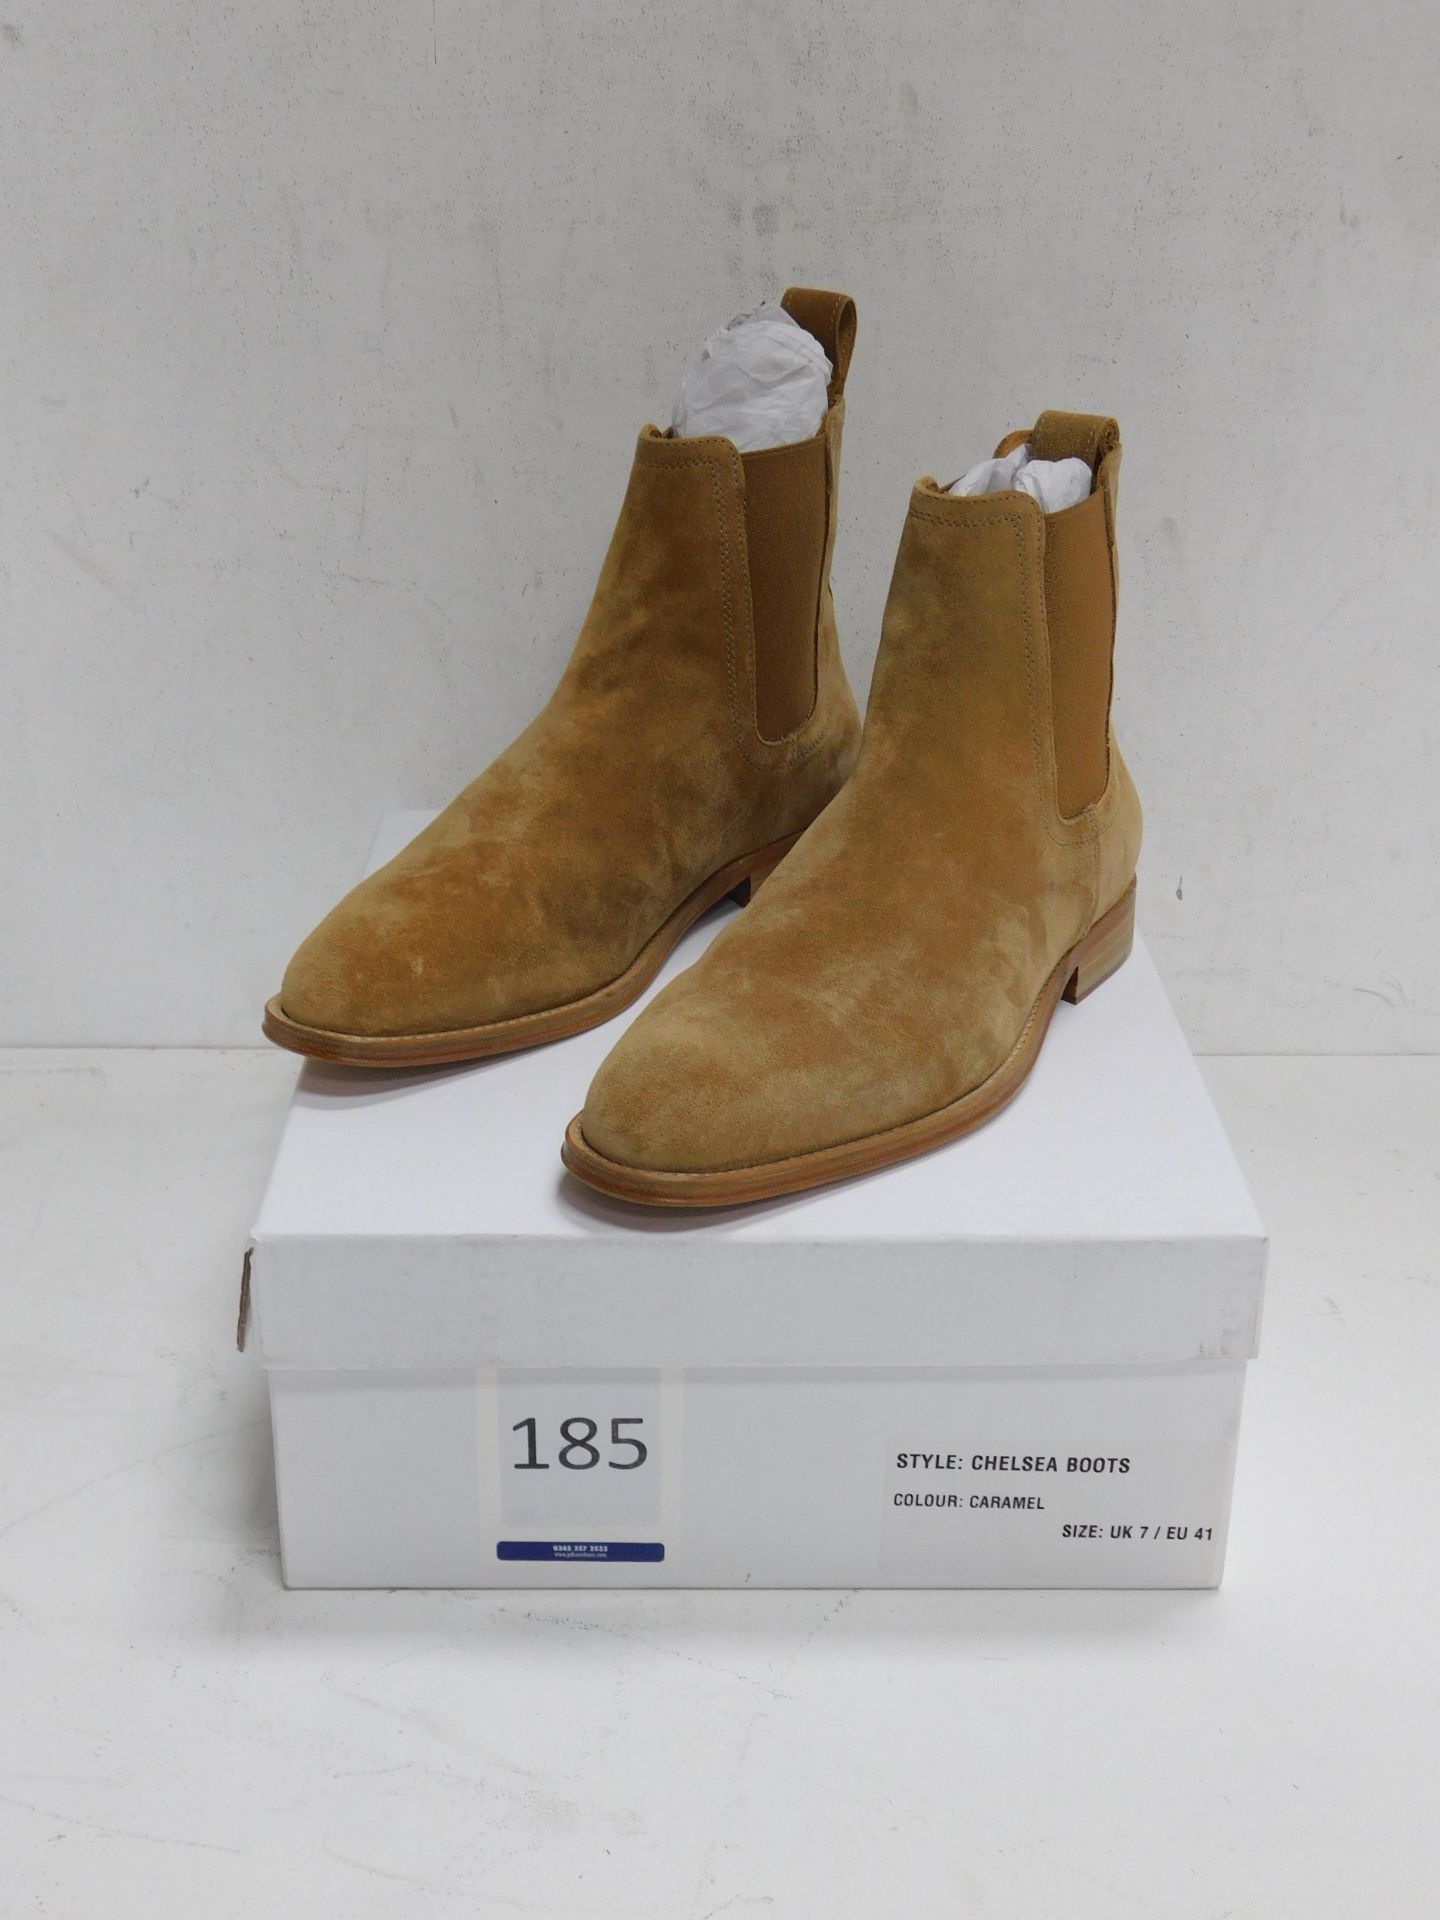 Pair of Ardent “Ardesia” Chelsea Boots, Size 7 (Located: Brentwood. Please Refer to General Notes)